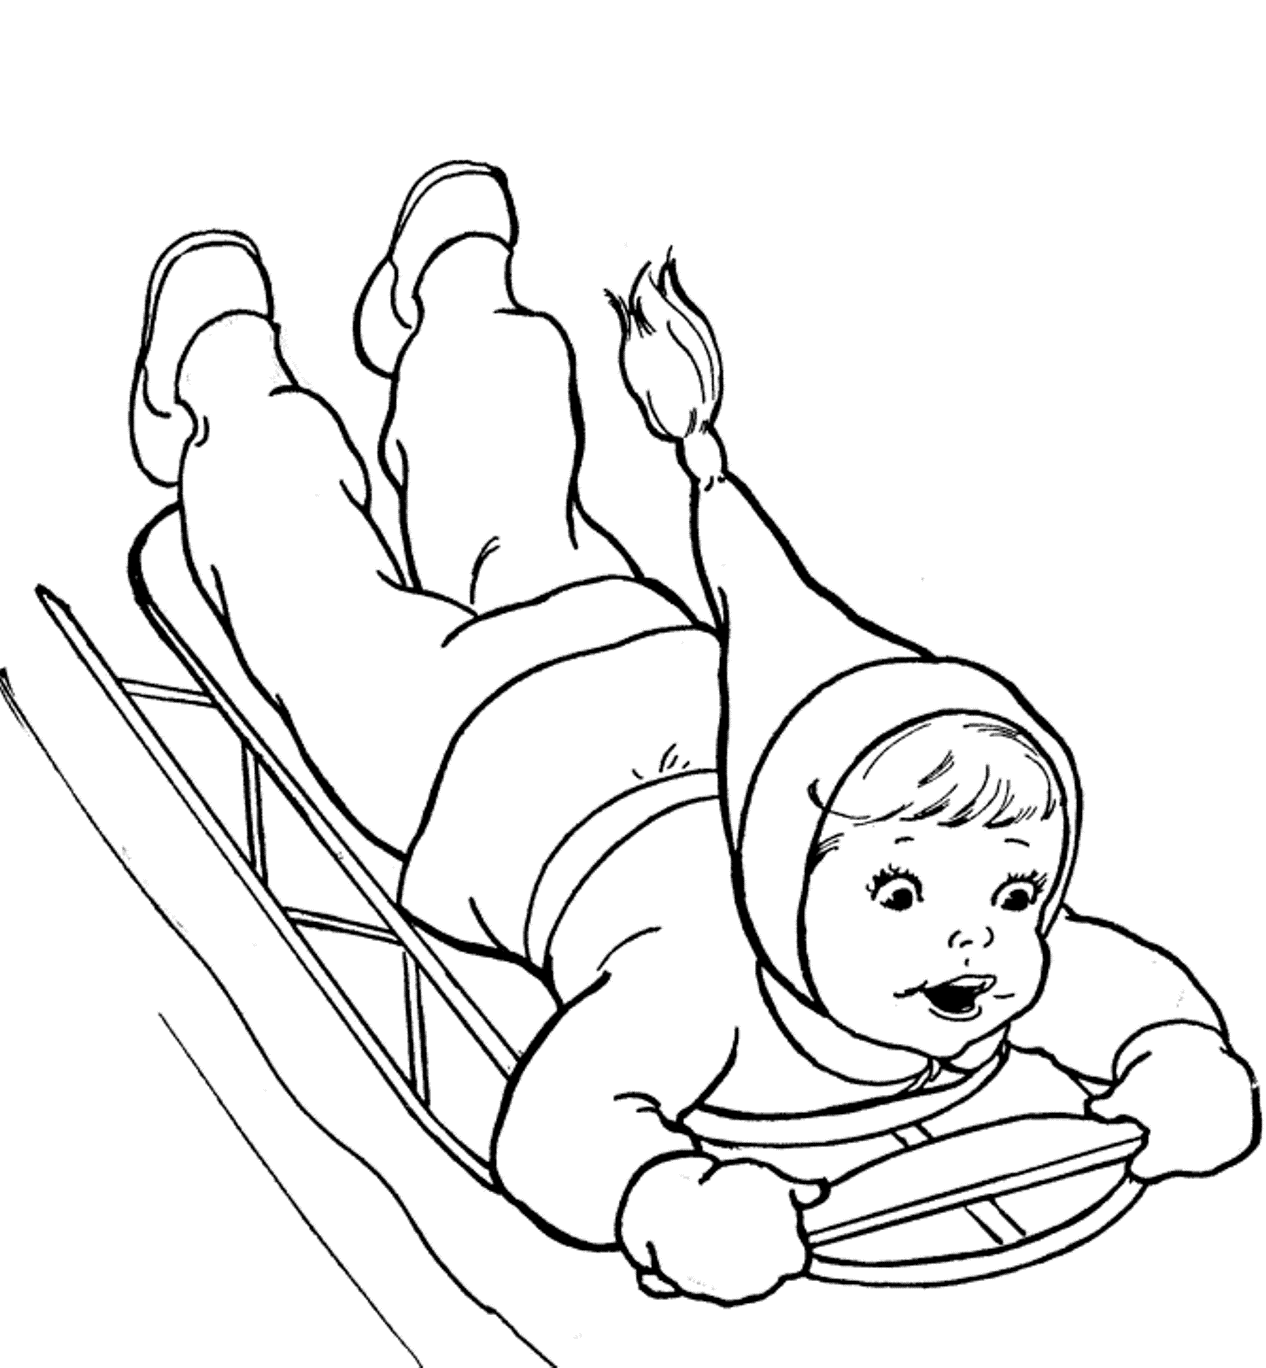 early childhood coloring pages of sledding - photo #32